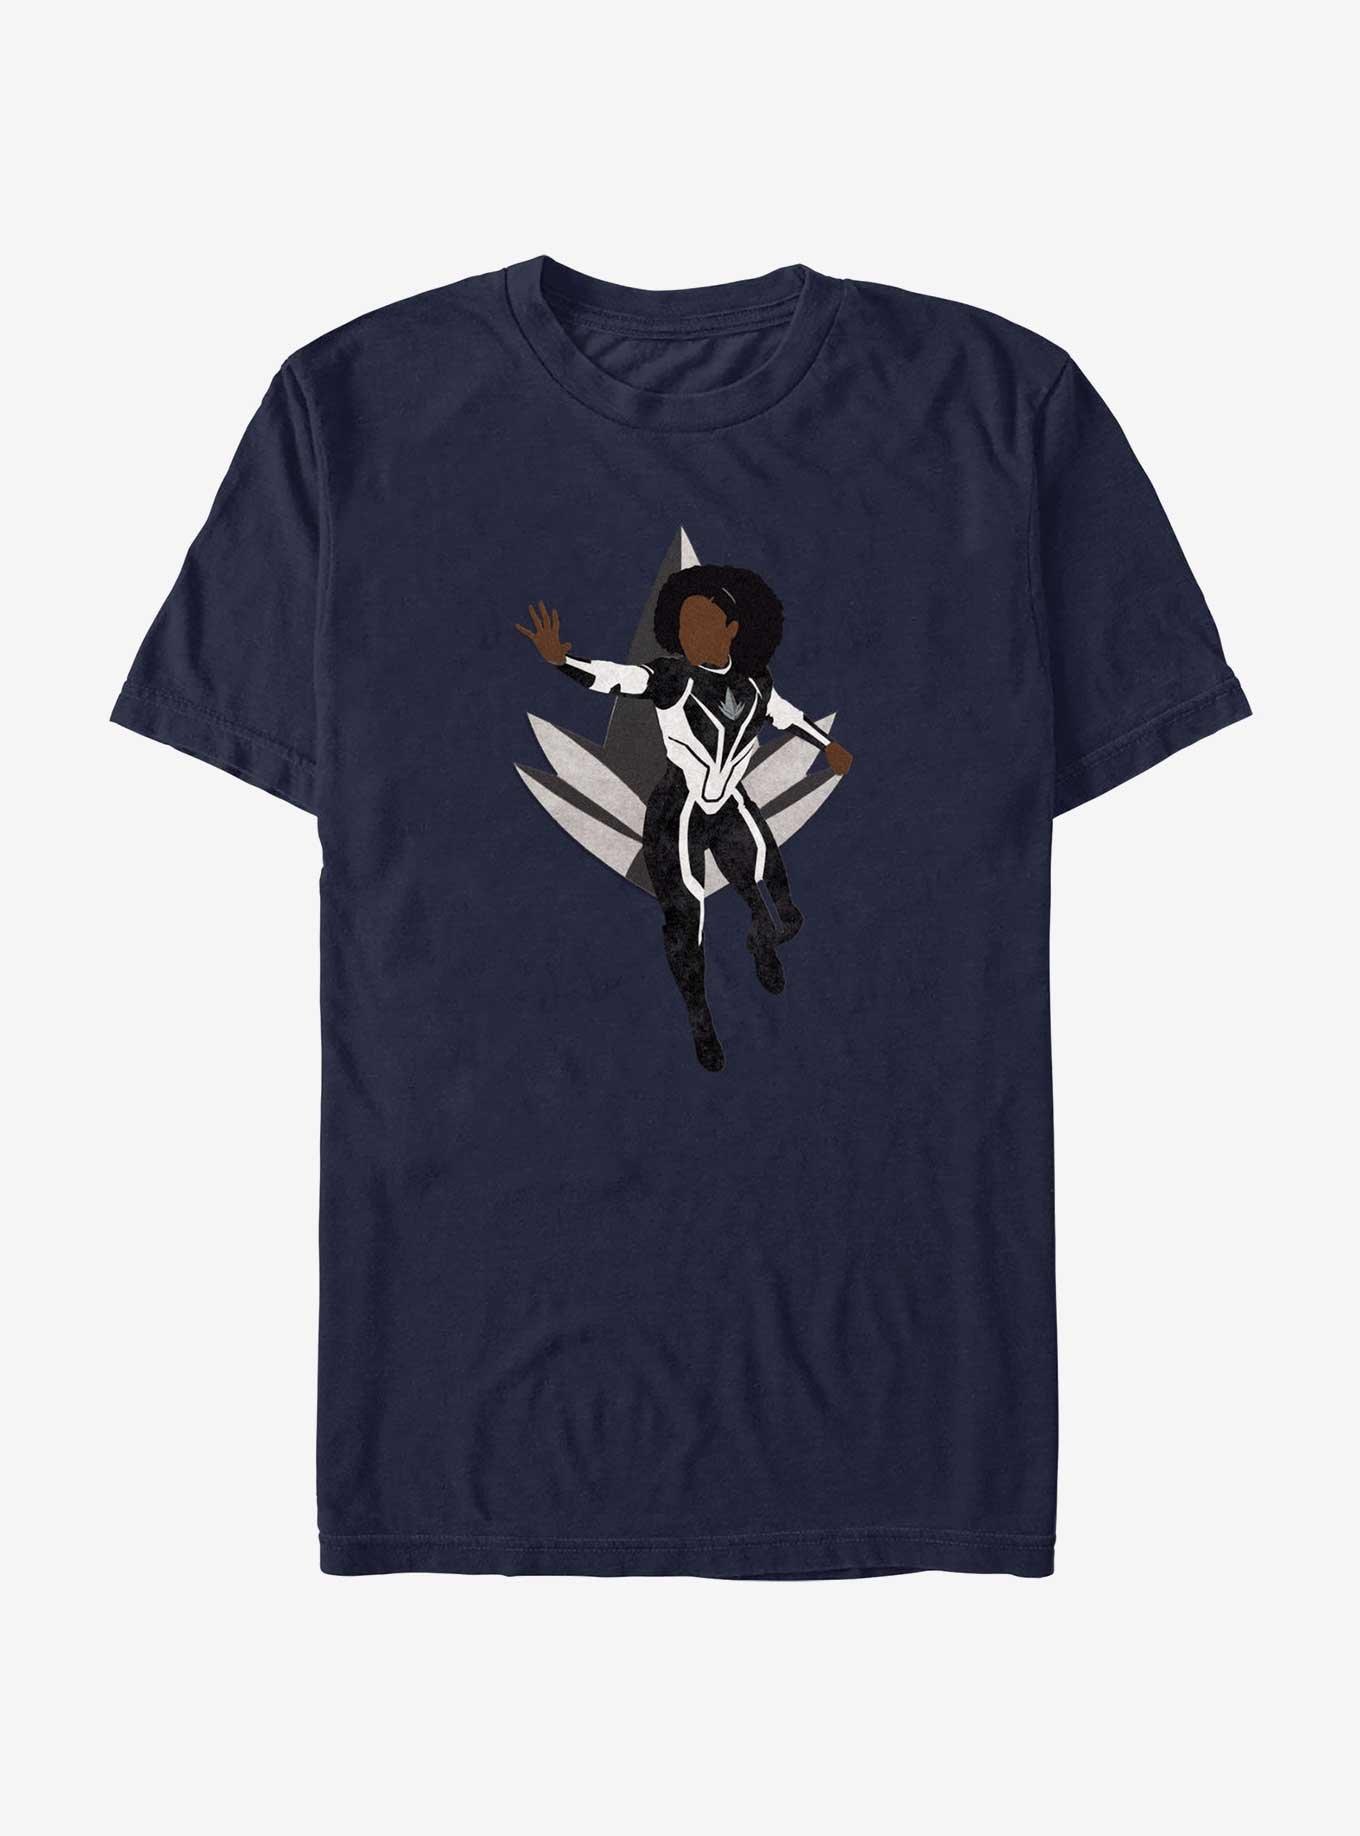 Marvel The Marvels Photon Silhouette T-Shirt, NAVY, hi-res